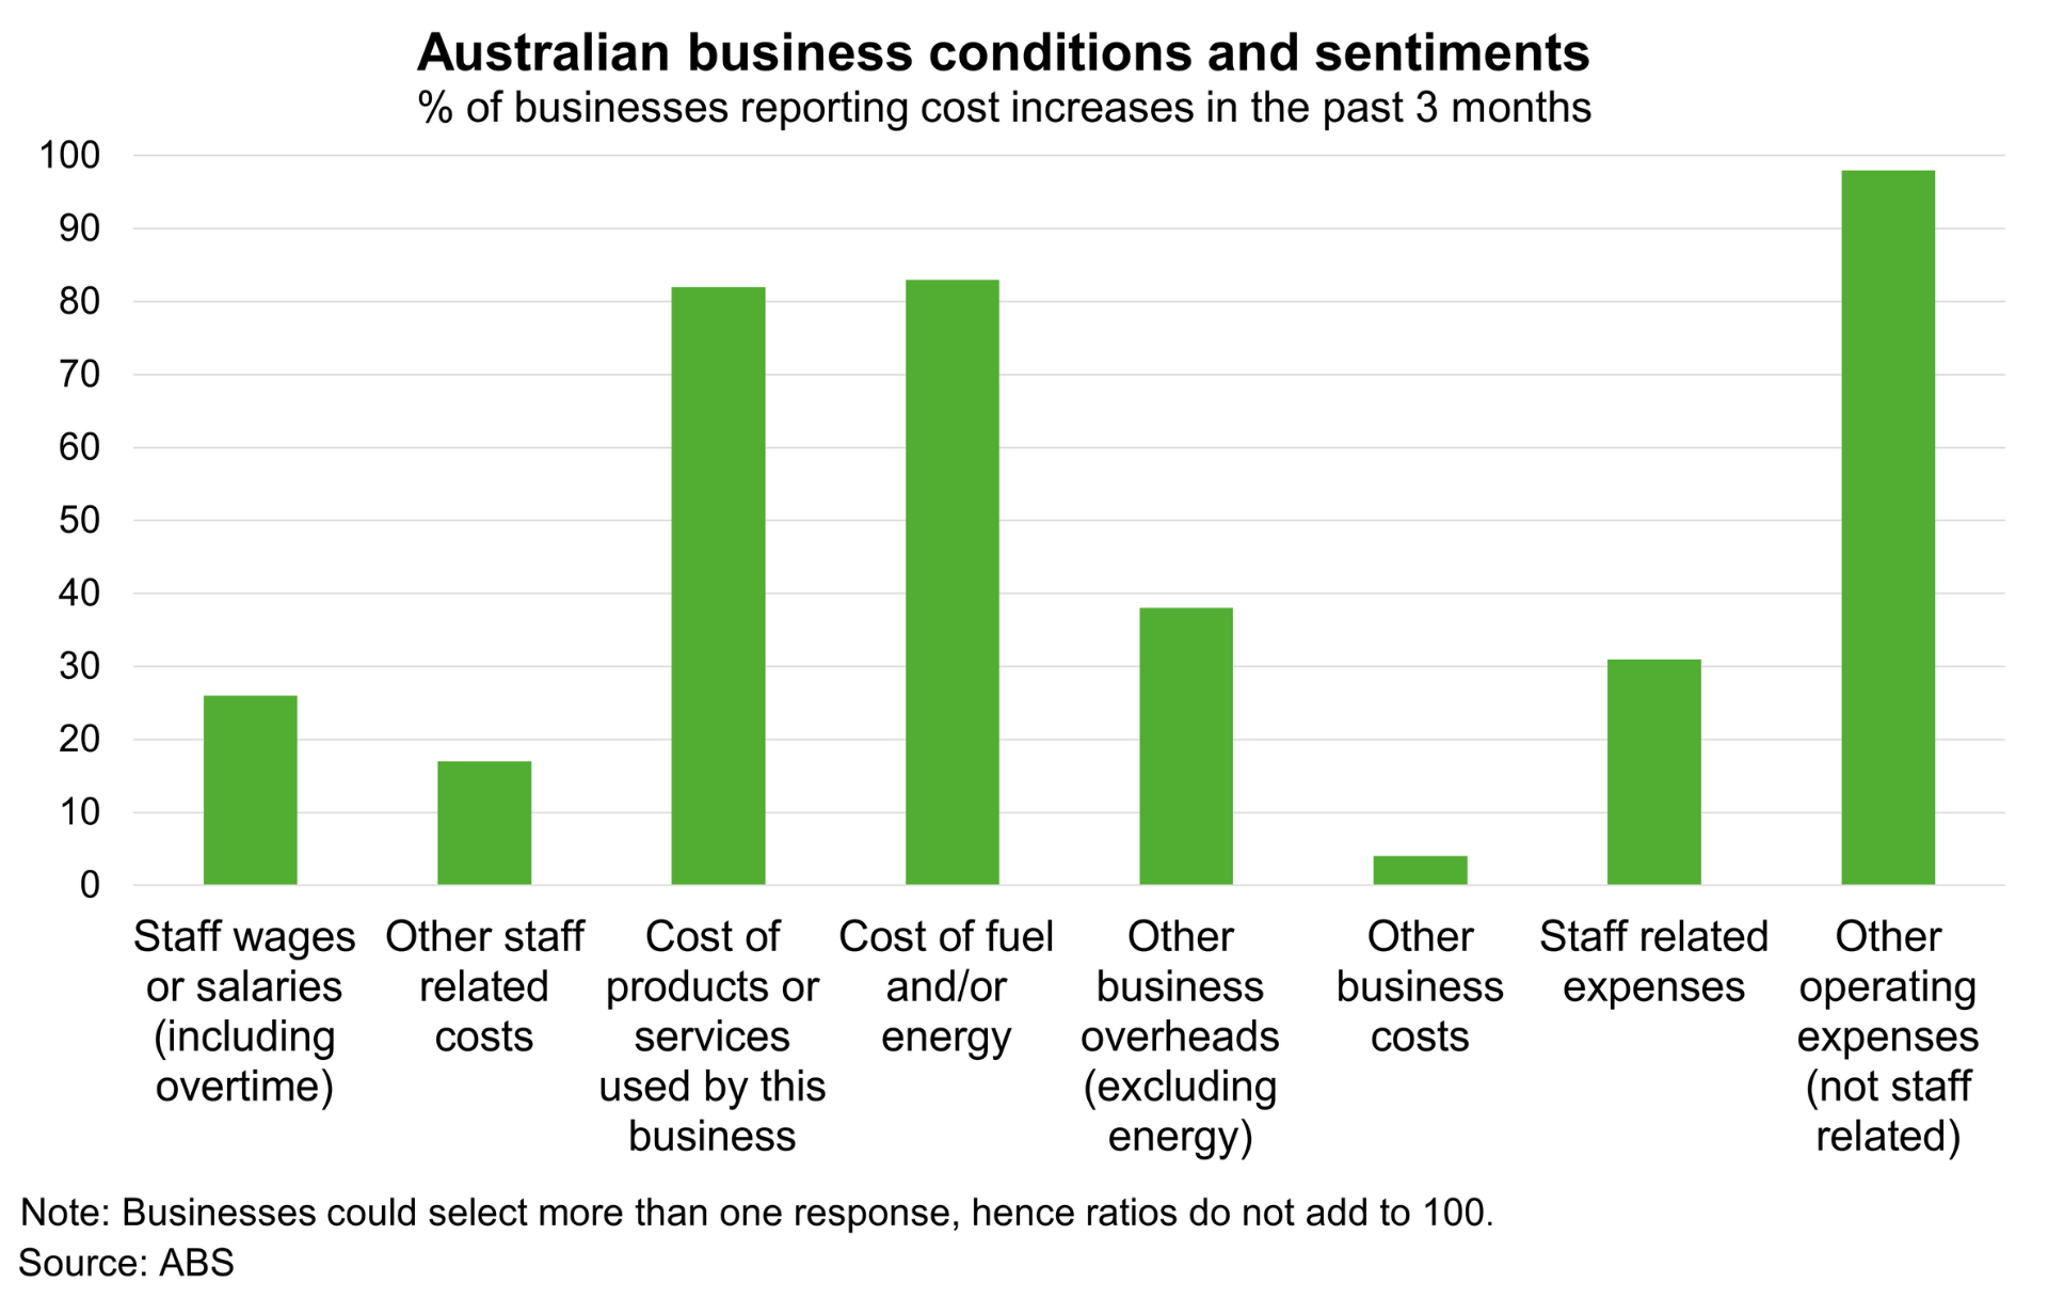 Chart on Australian business conditions and sentiments with % of businesses reporting cost increases